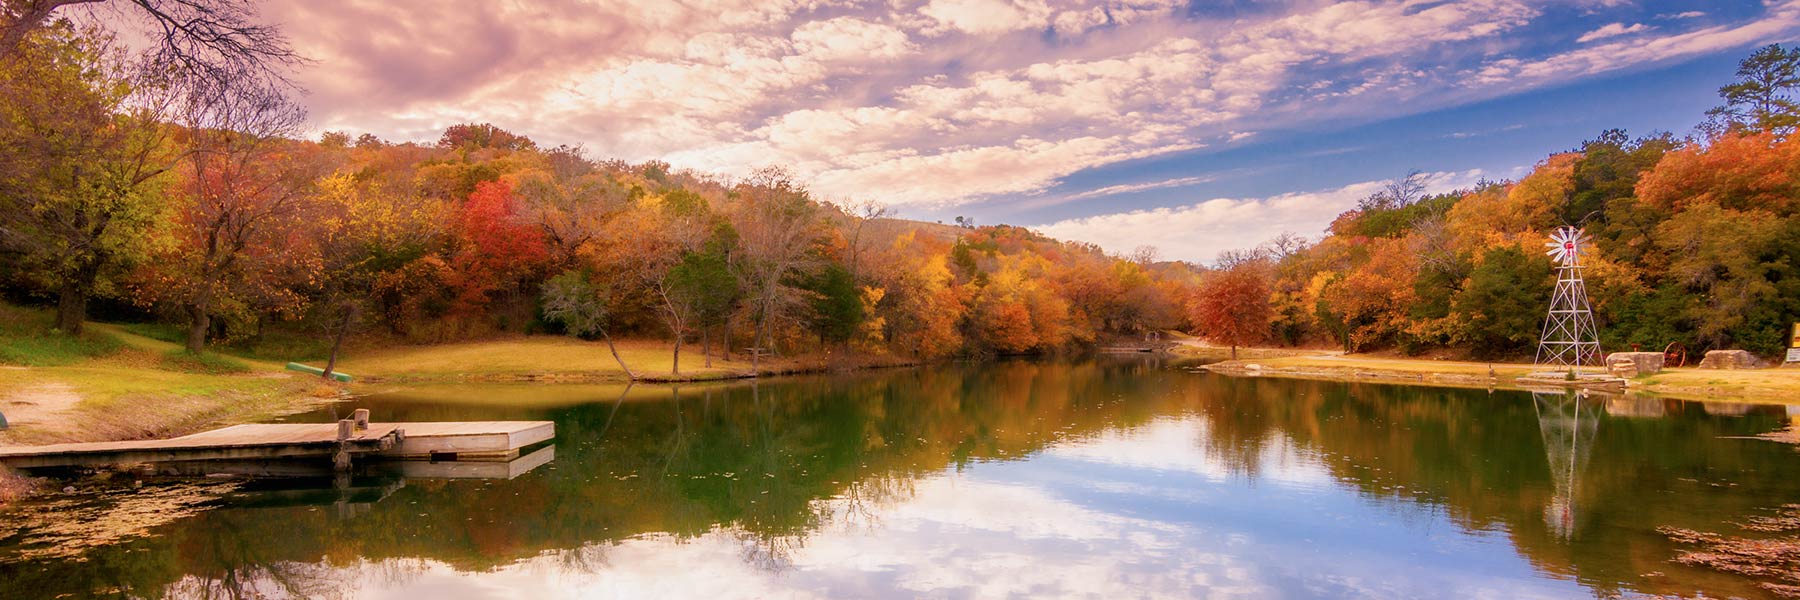 Indian Summer landscape in Murray county of Oklahoma